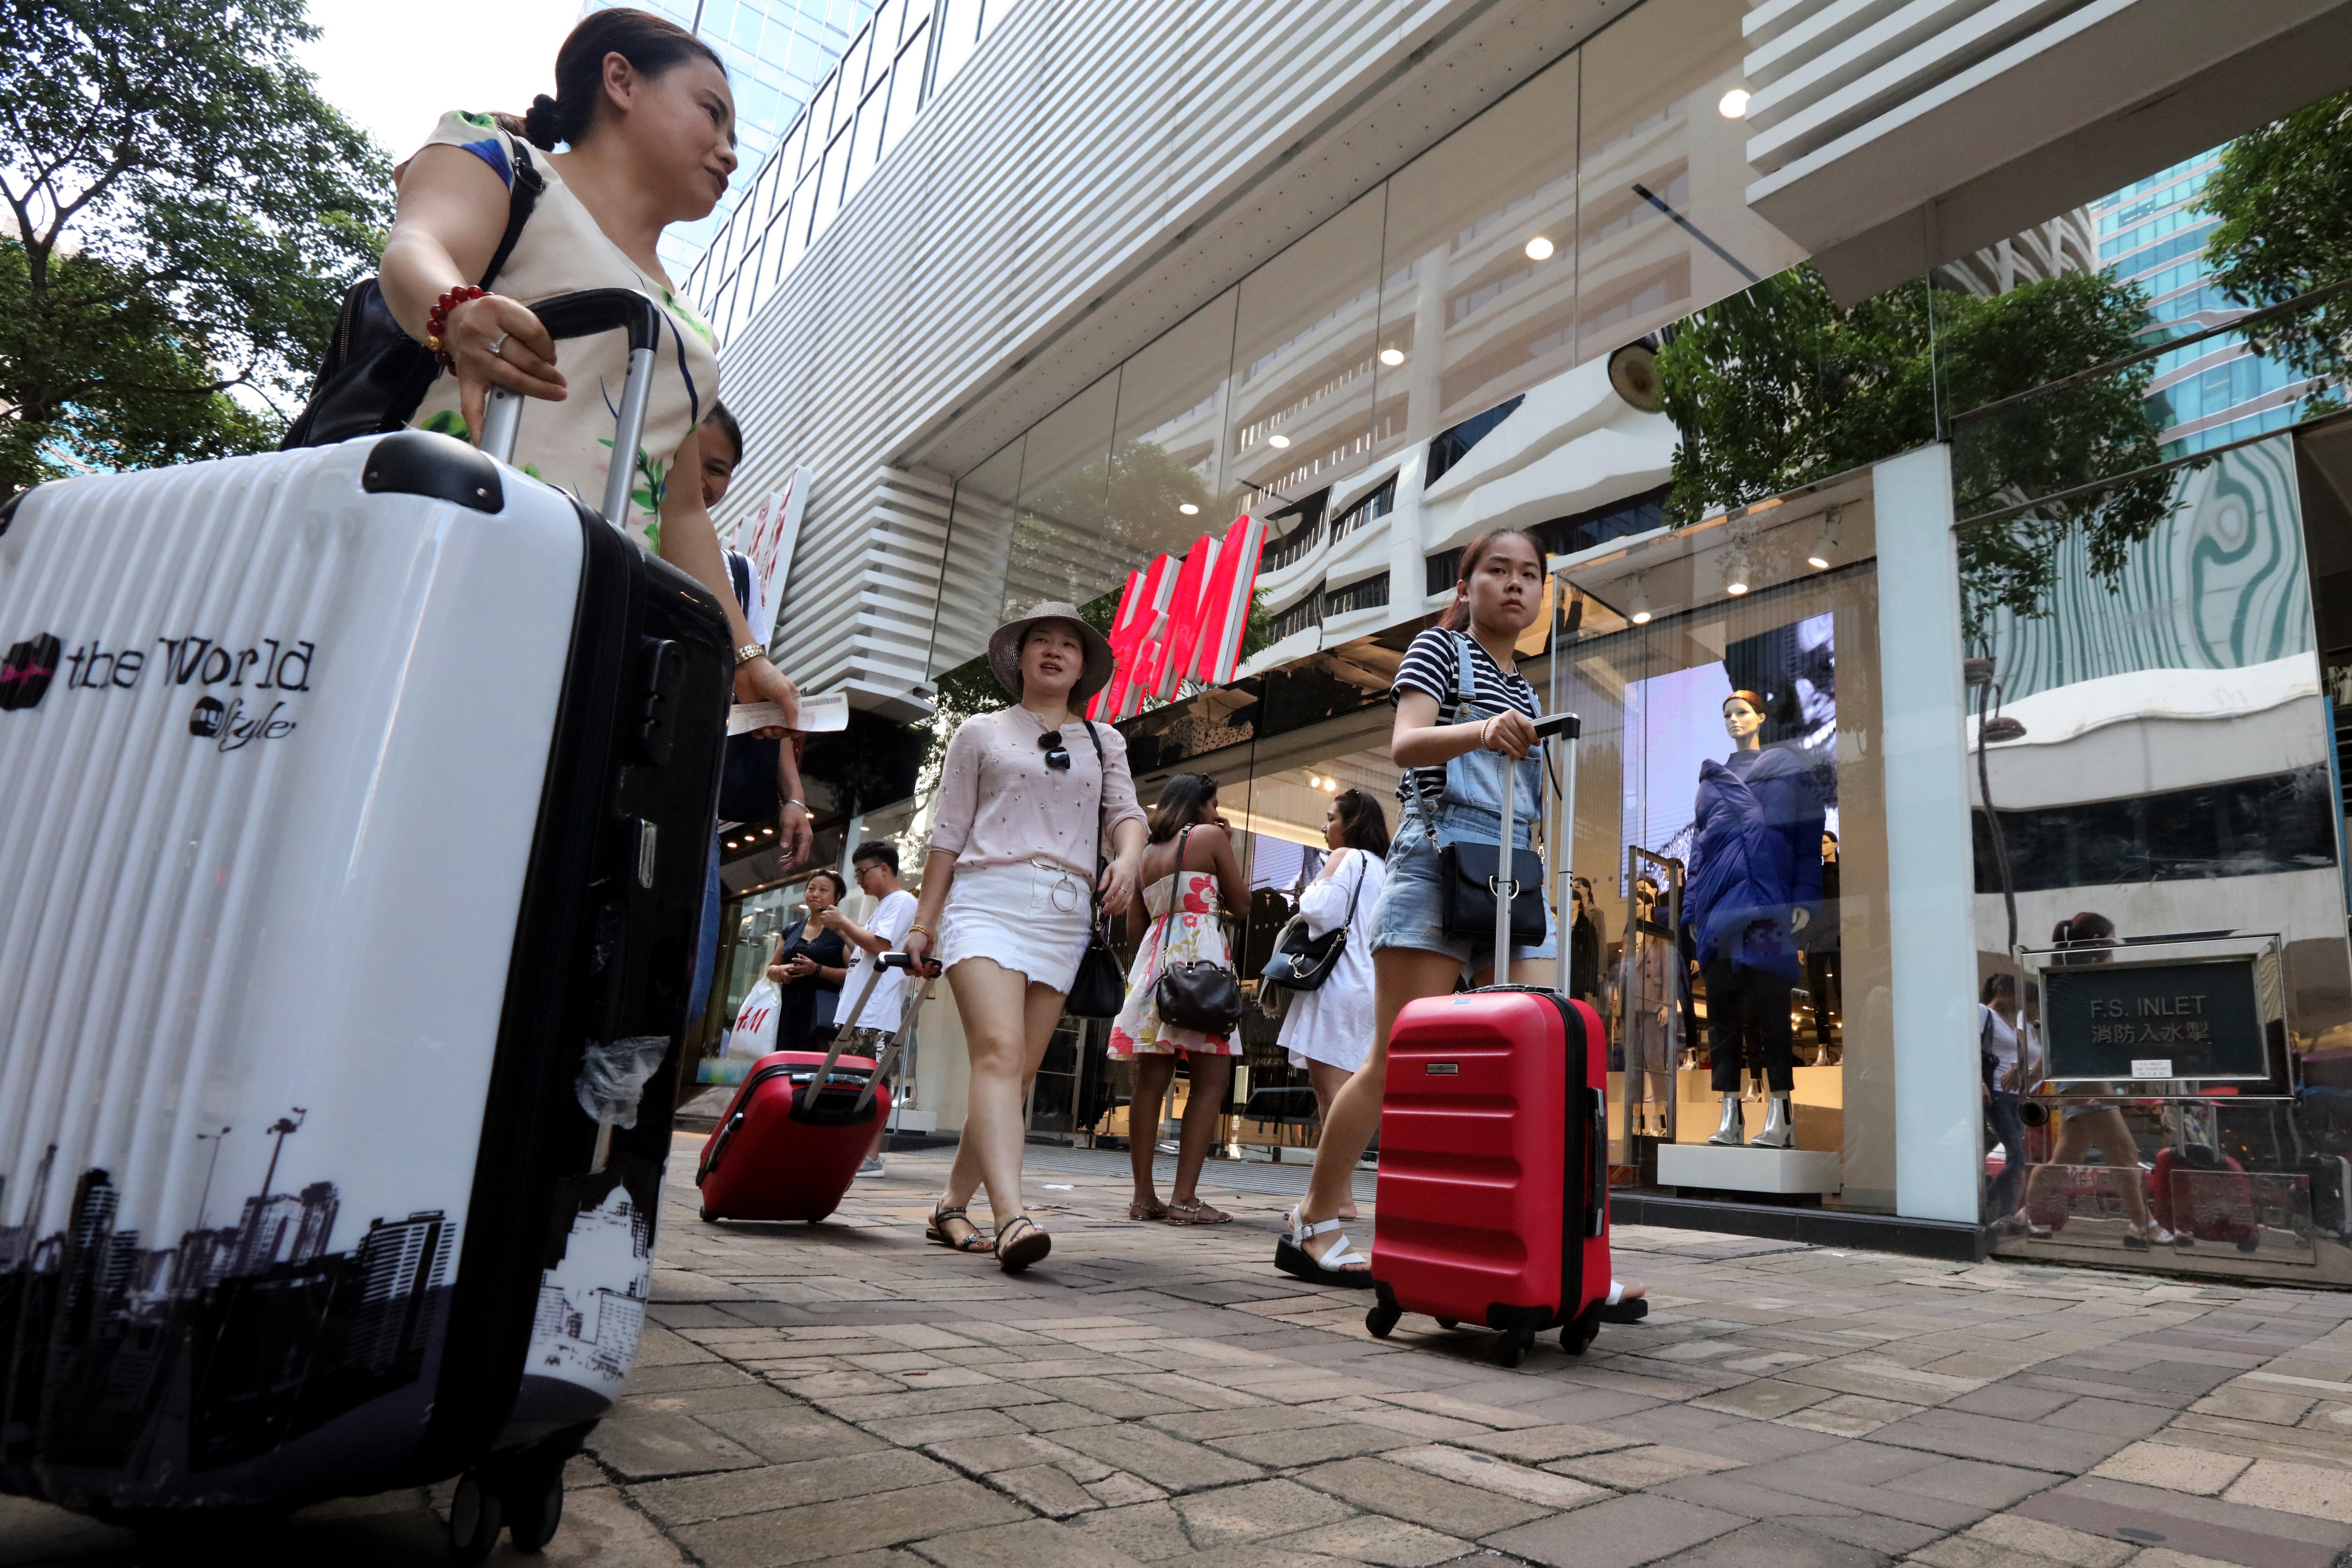 Structurally the industry remains reliant on visitors from mainland China, making it vulnerable to shifts in travel patterns